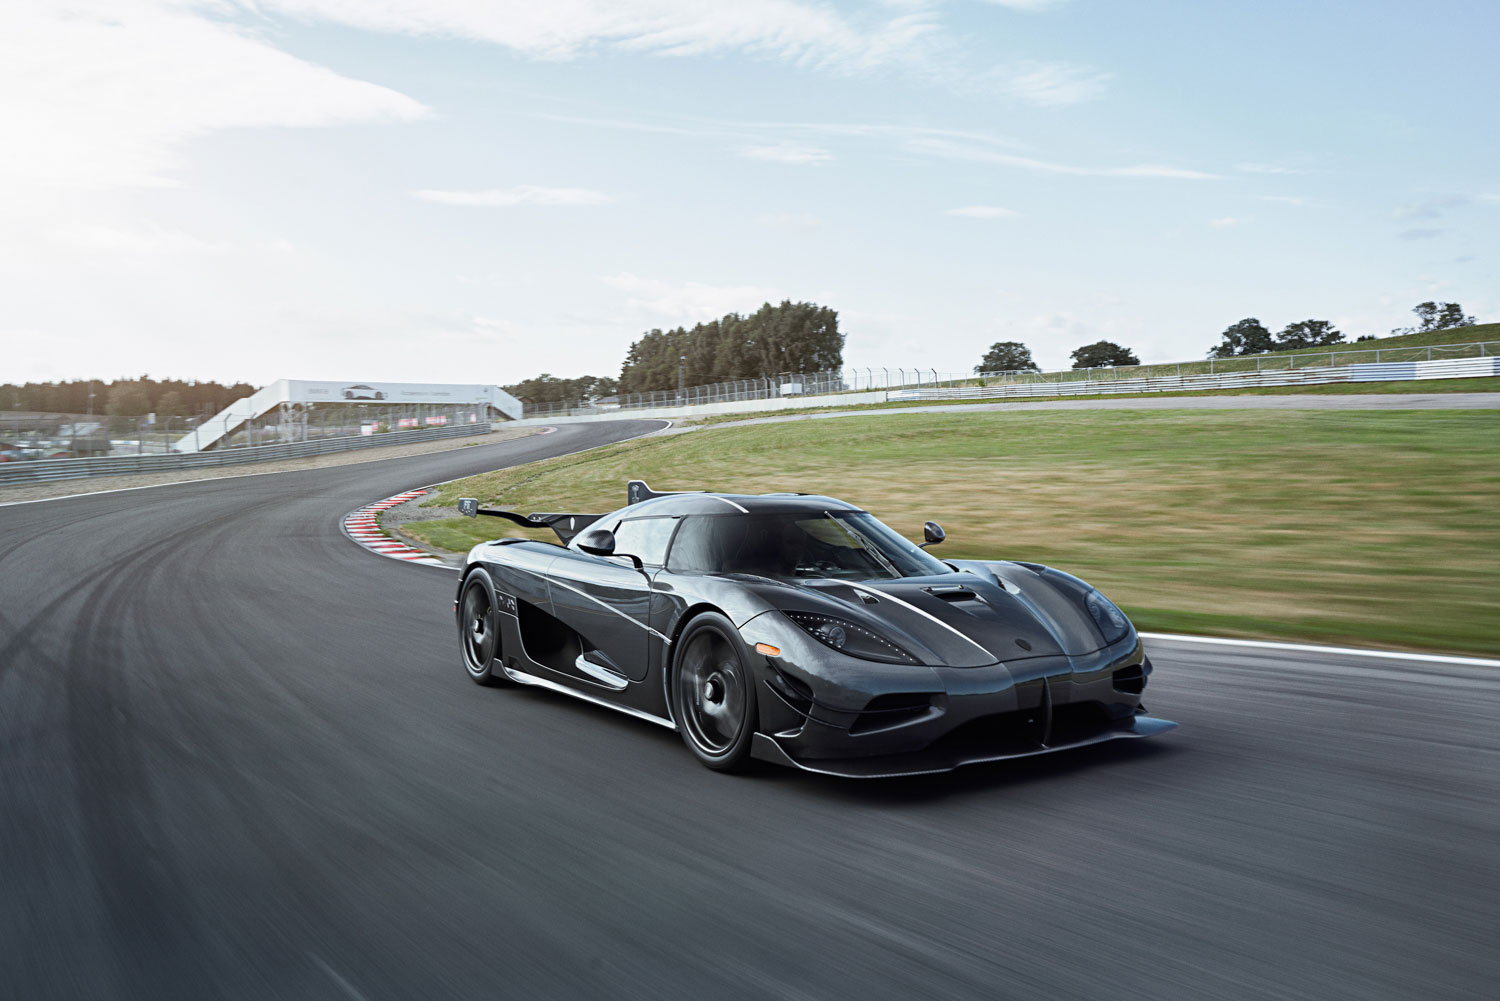 The 7 Fastest Cars in the World Right Now | Improb